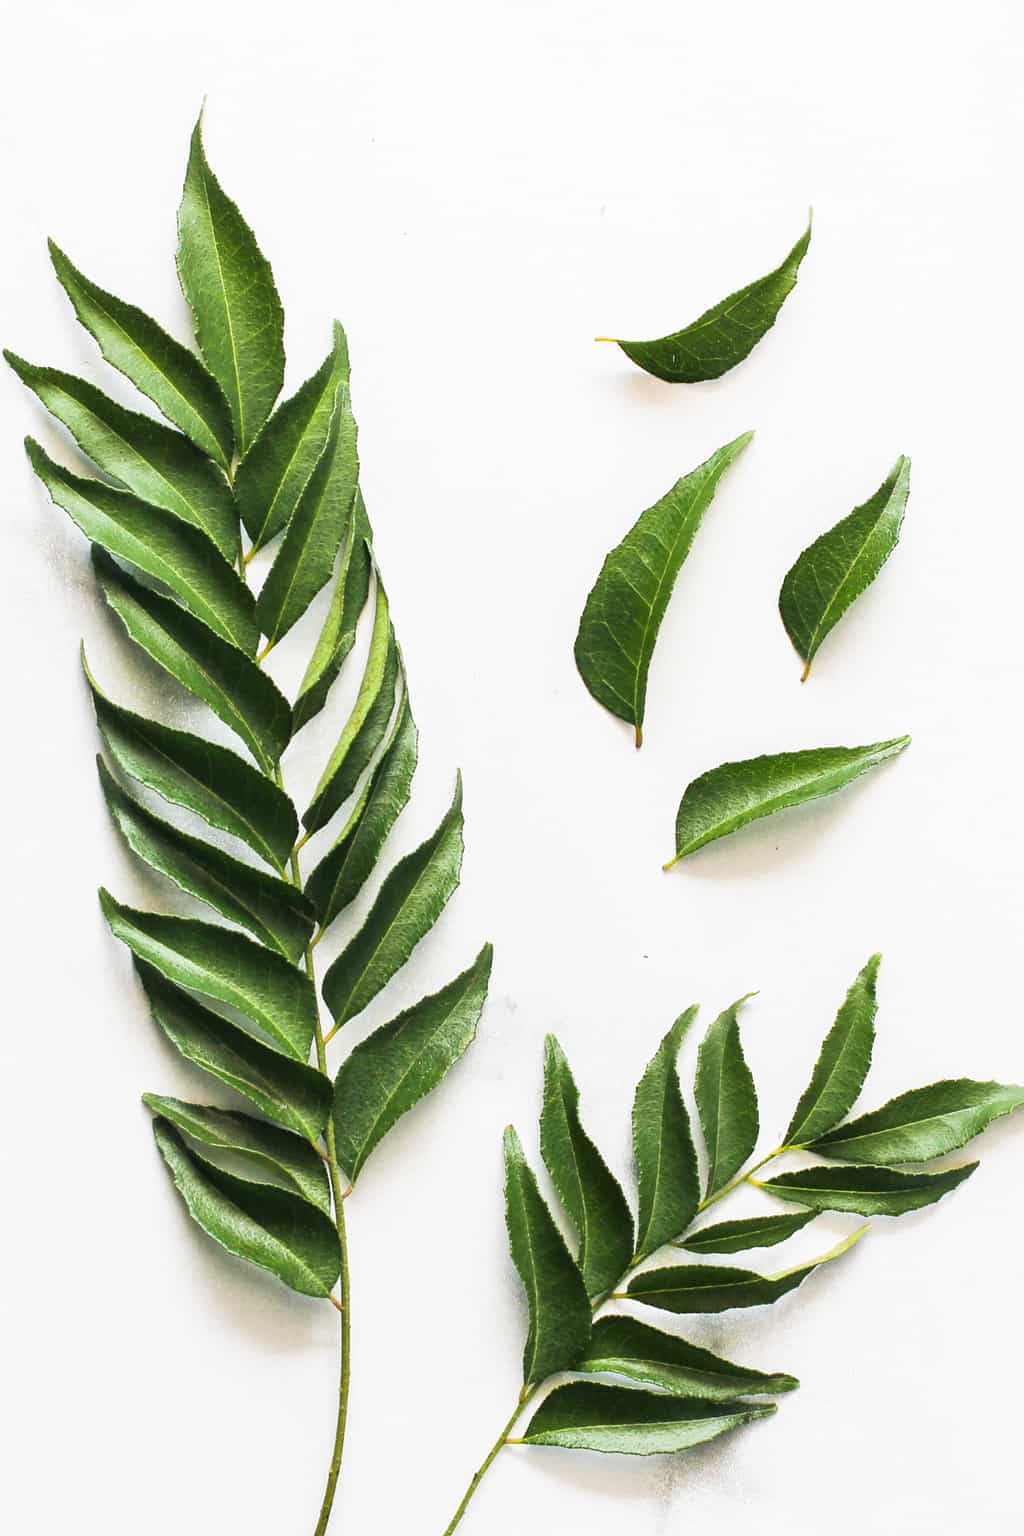 Curry Leaves - How to buy, use & store - Ministry of Curry